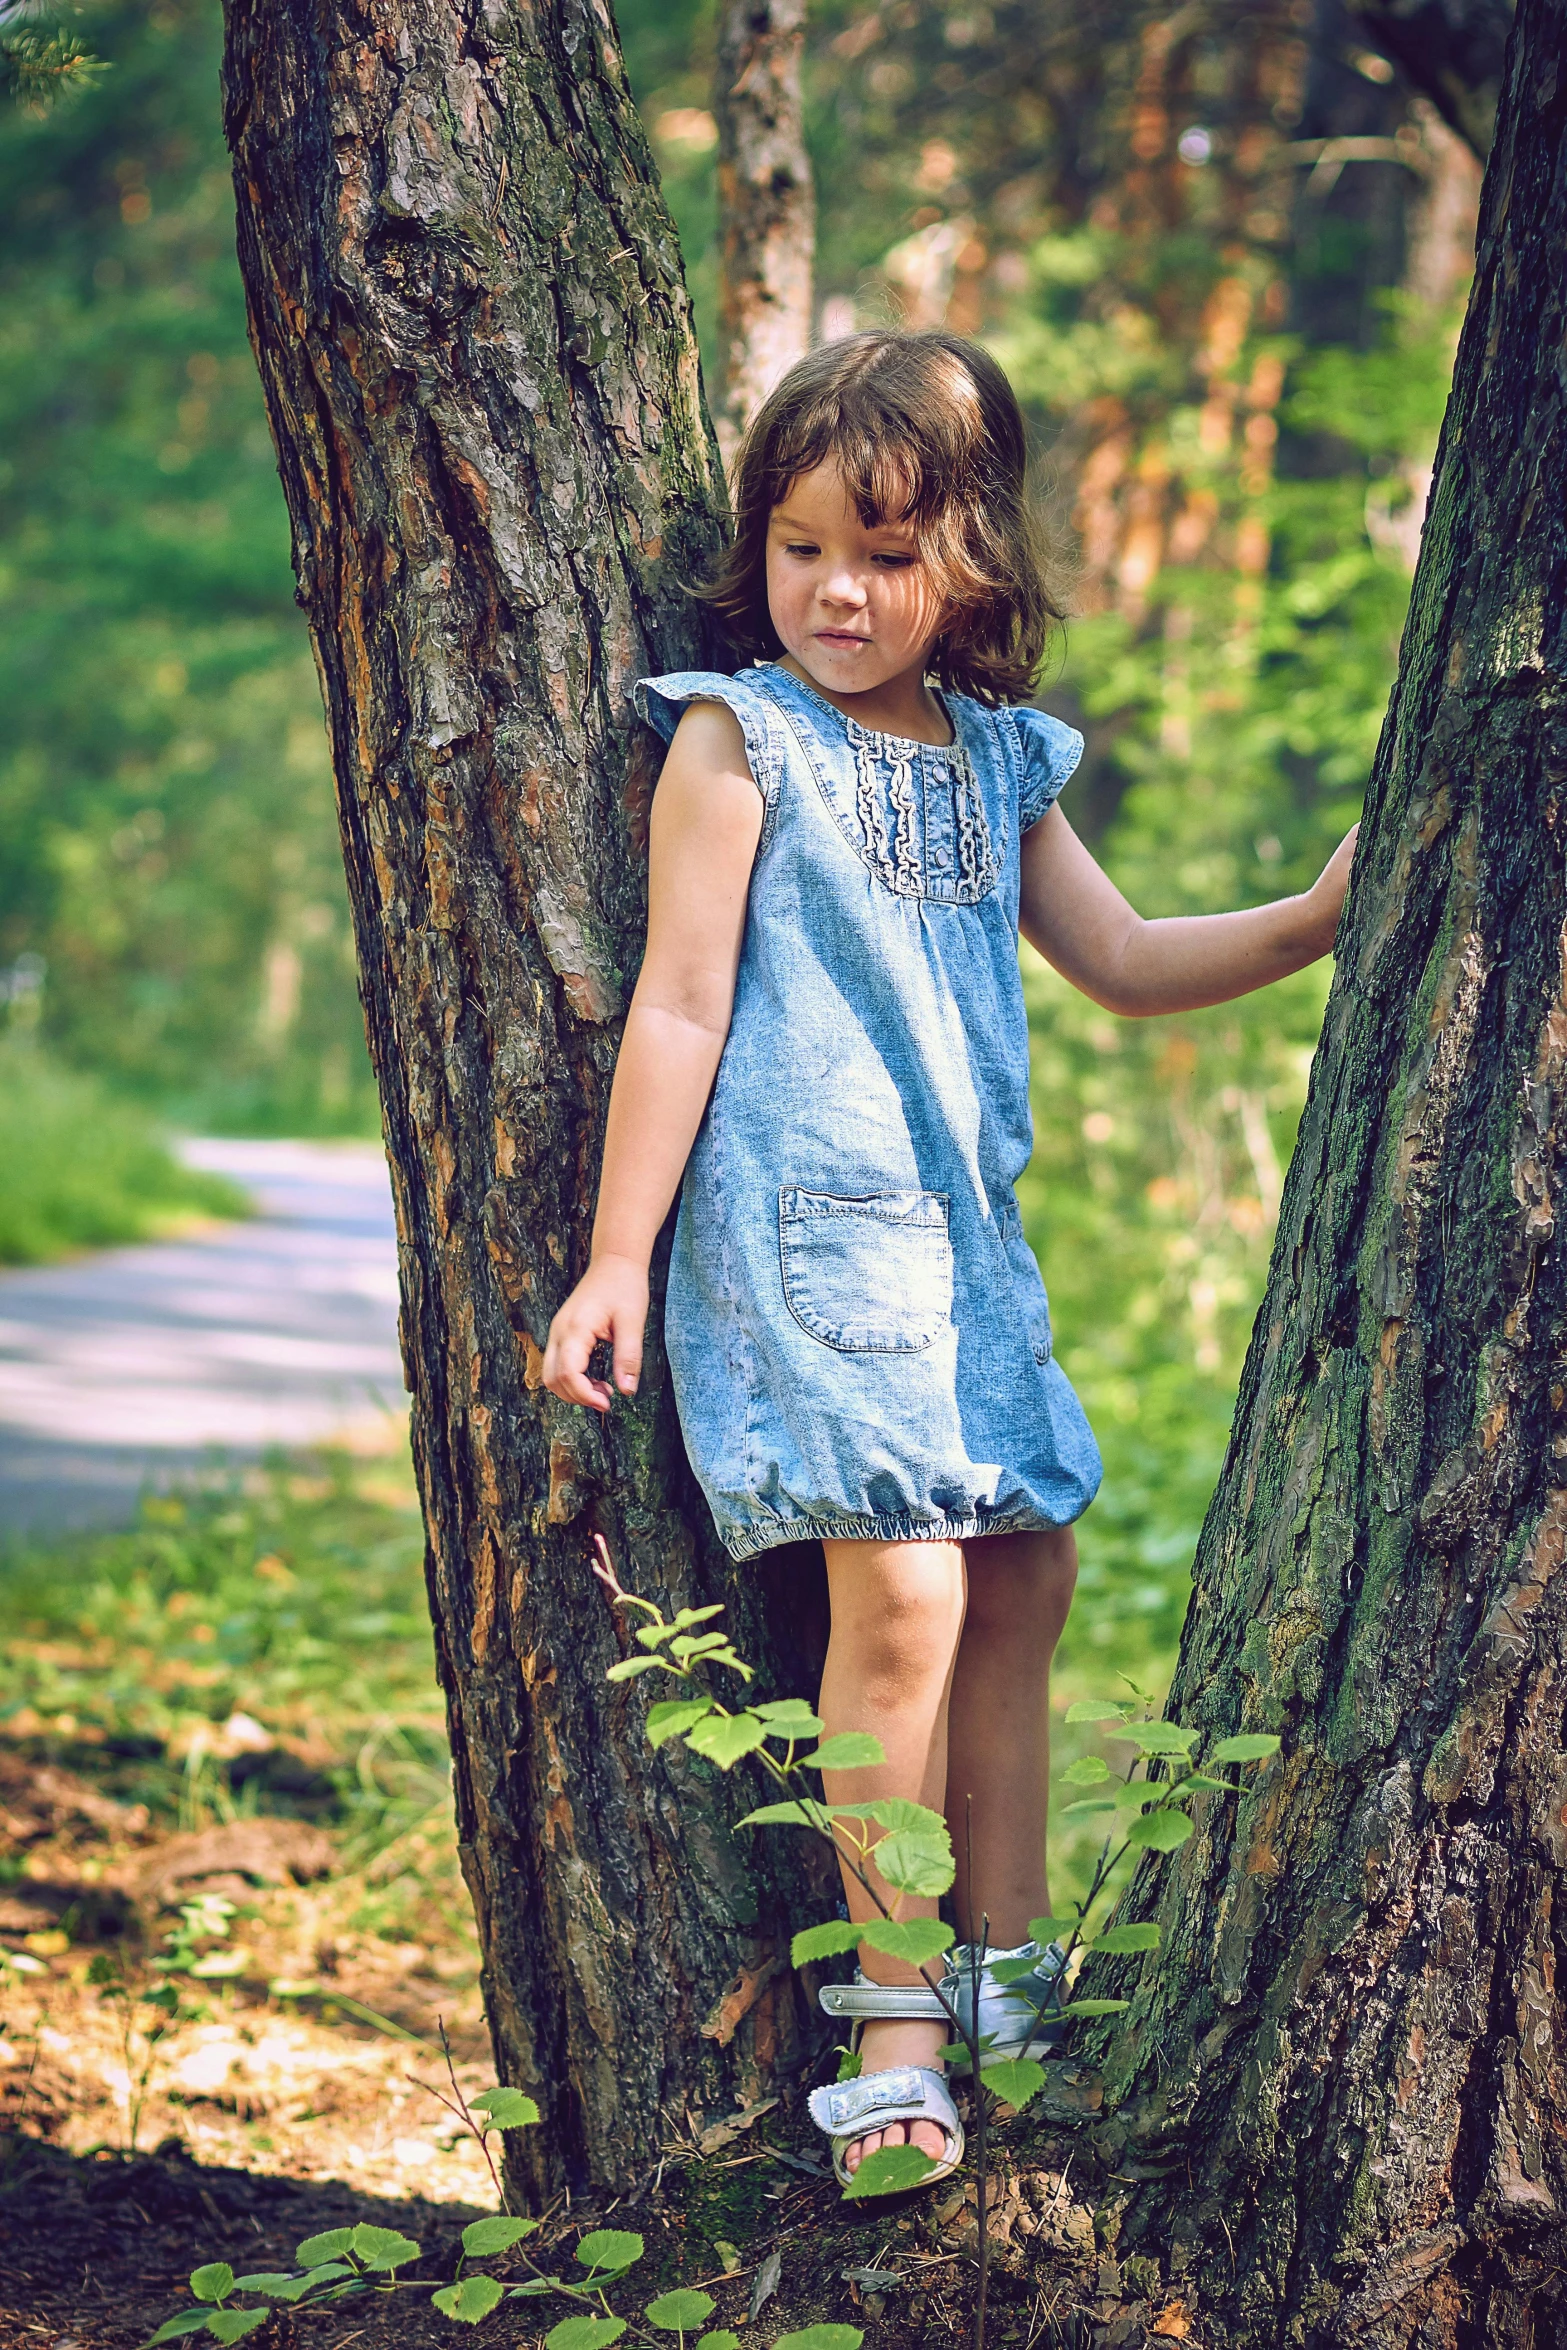 a  poses for a po while standing up against a tree in a wooded area